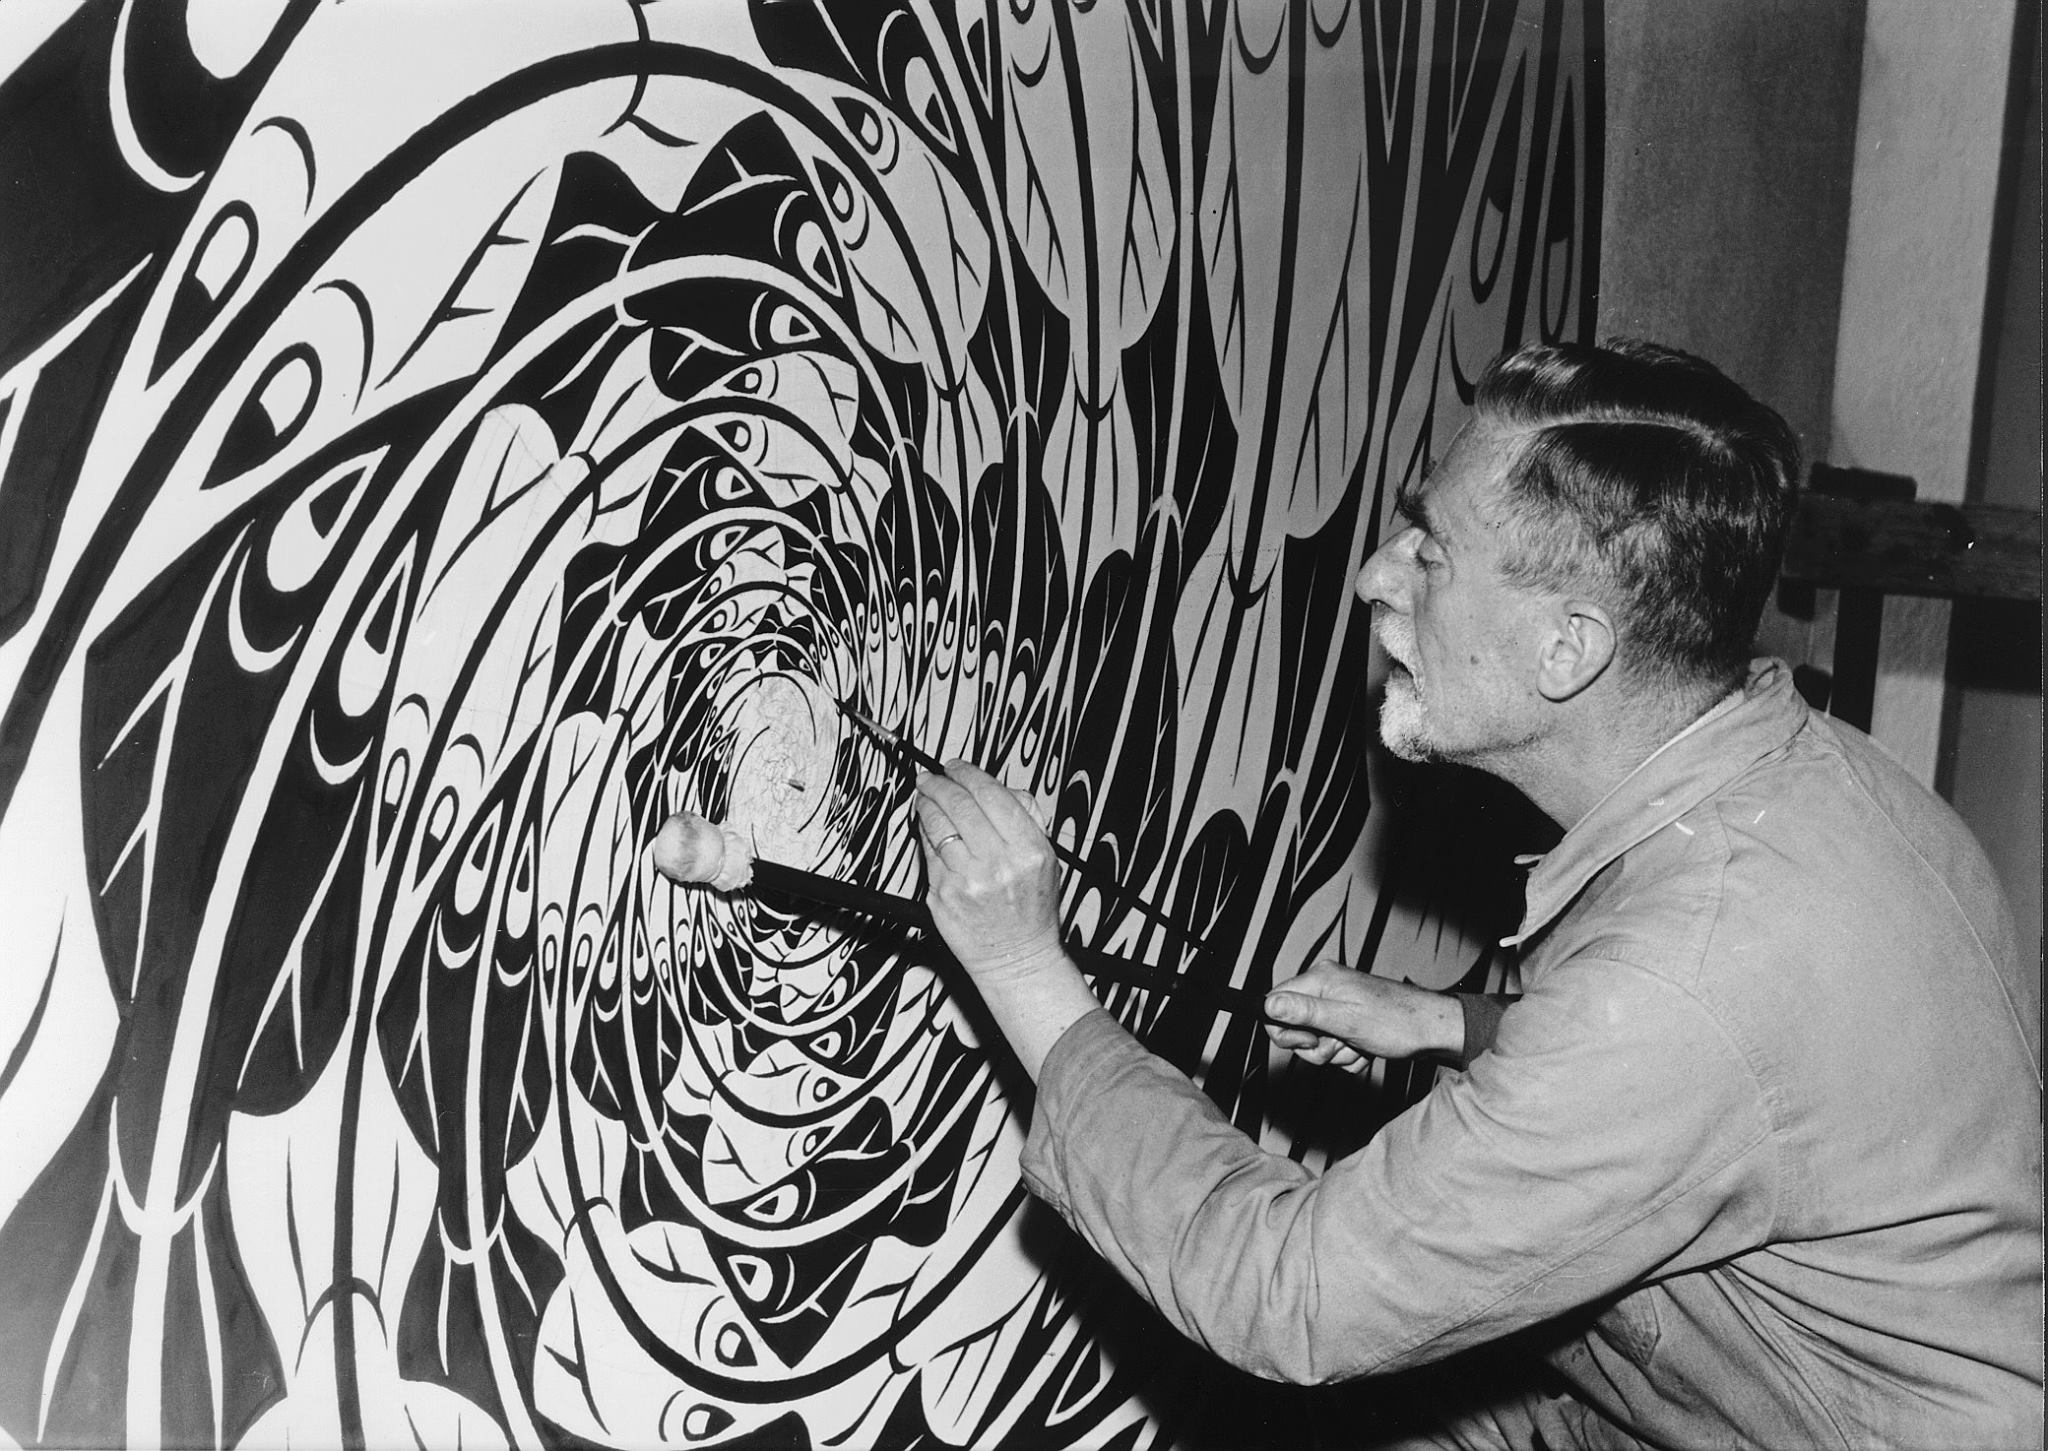 Artist M.C. Escher Demonstrates His Artistic Process in a Fascinating